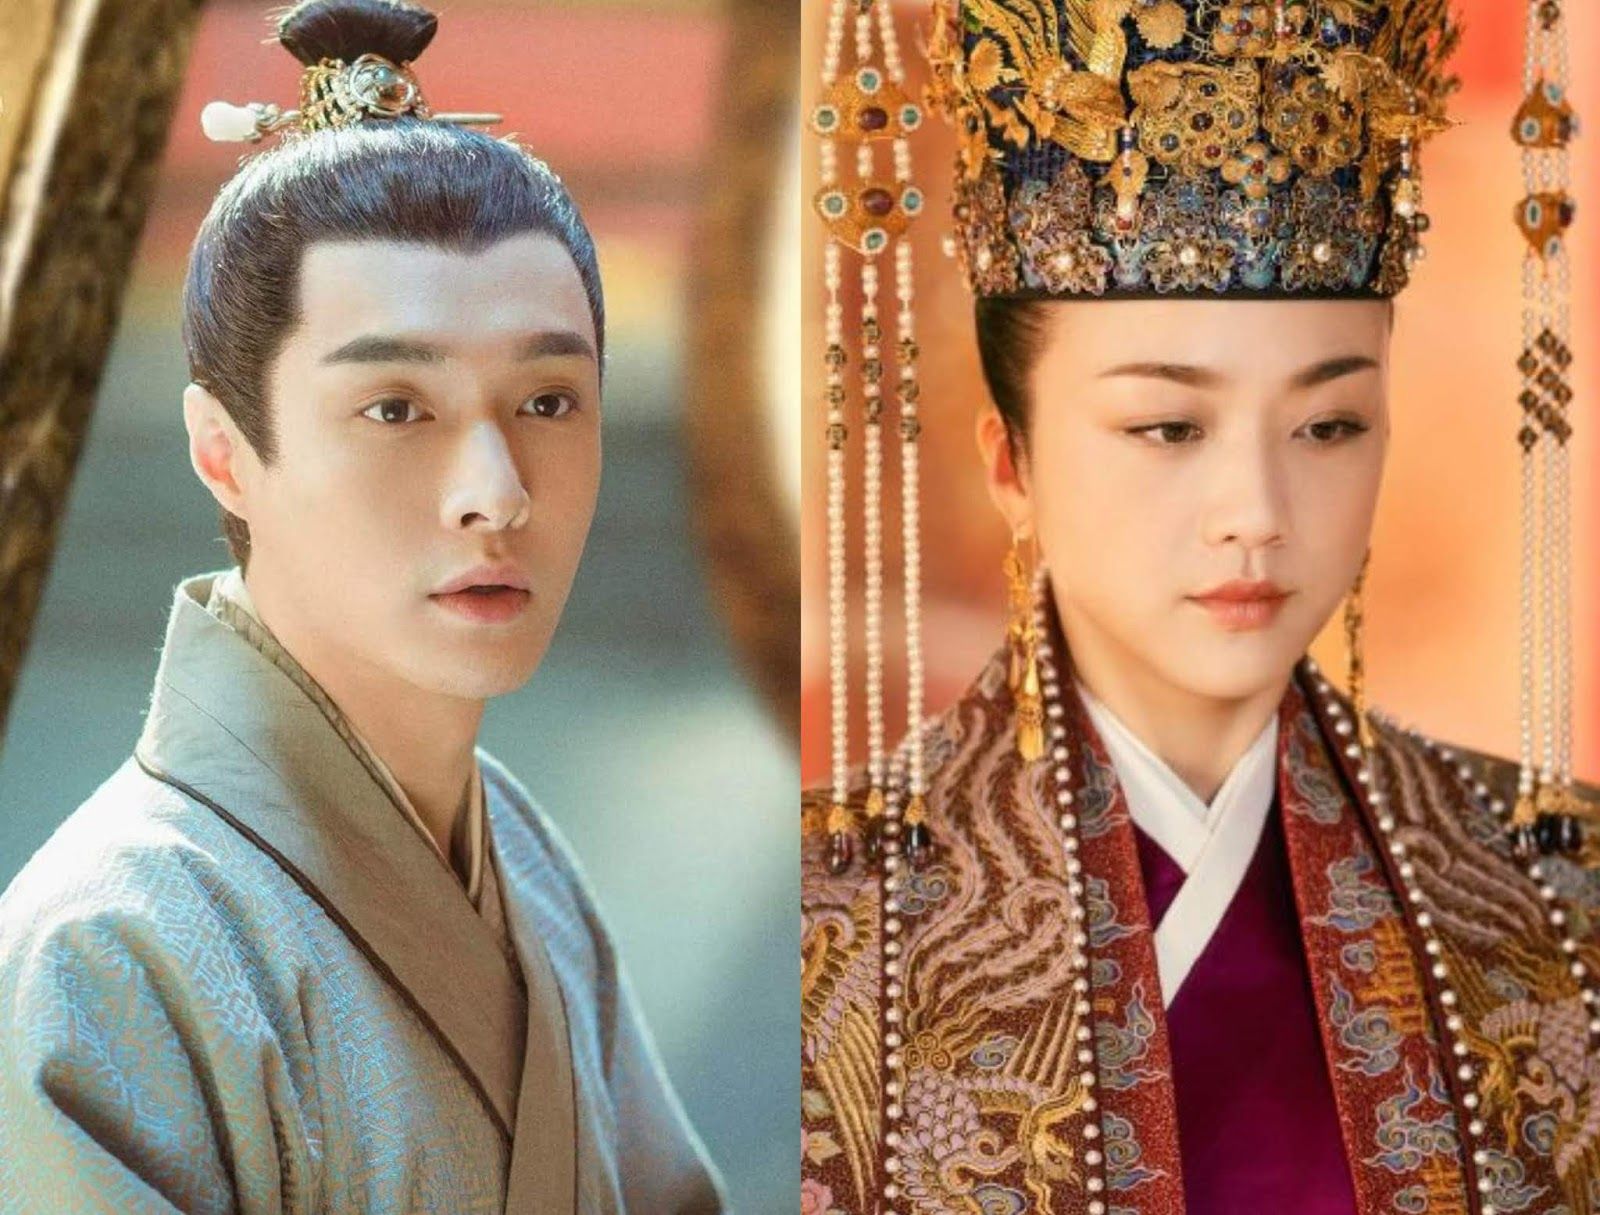 Zhang Yixing to Make First Appearance as Tang Wei's Son in Ming